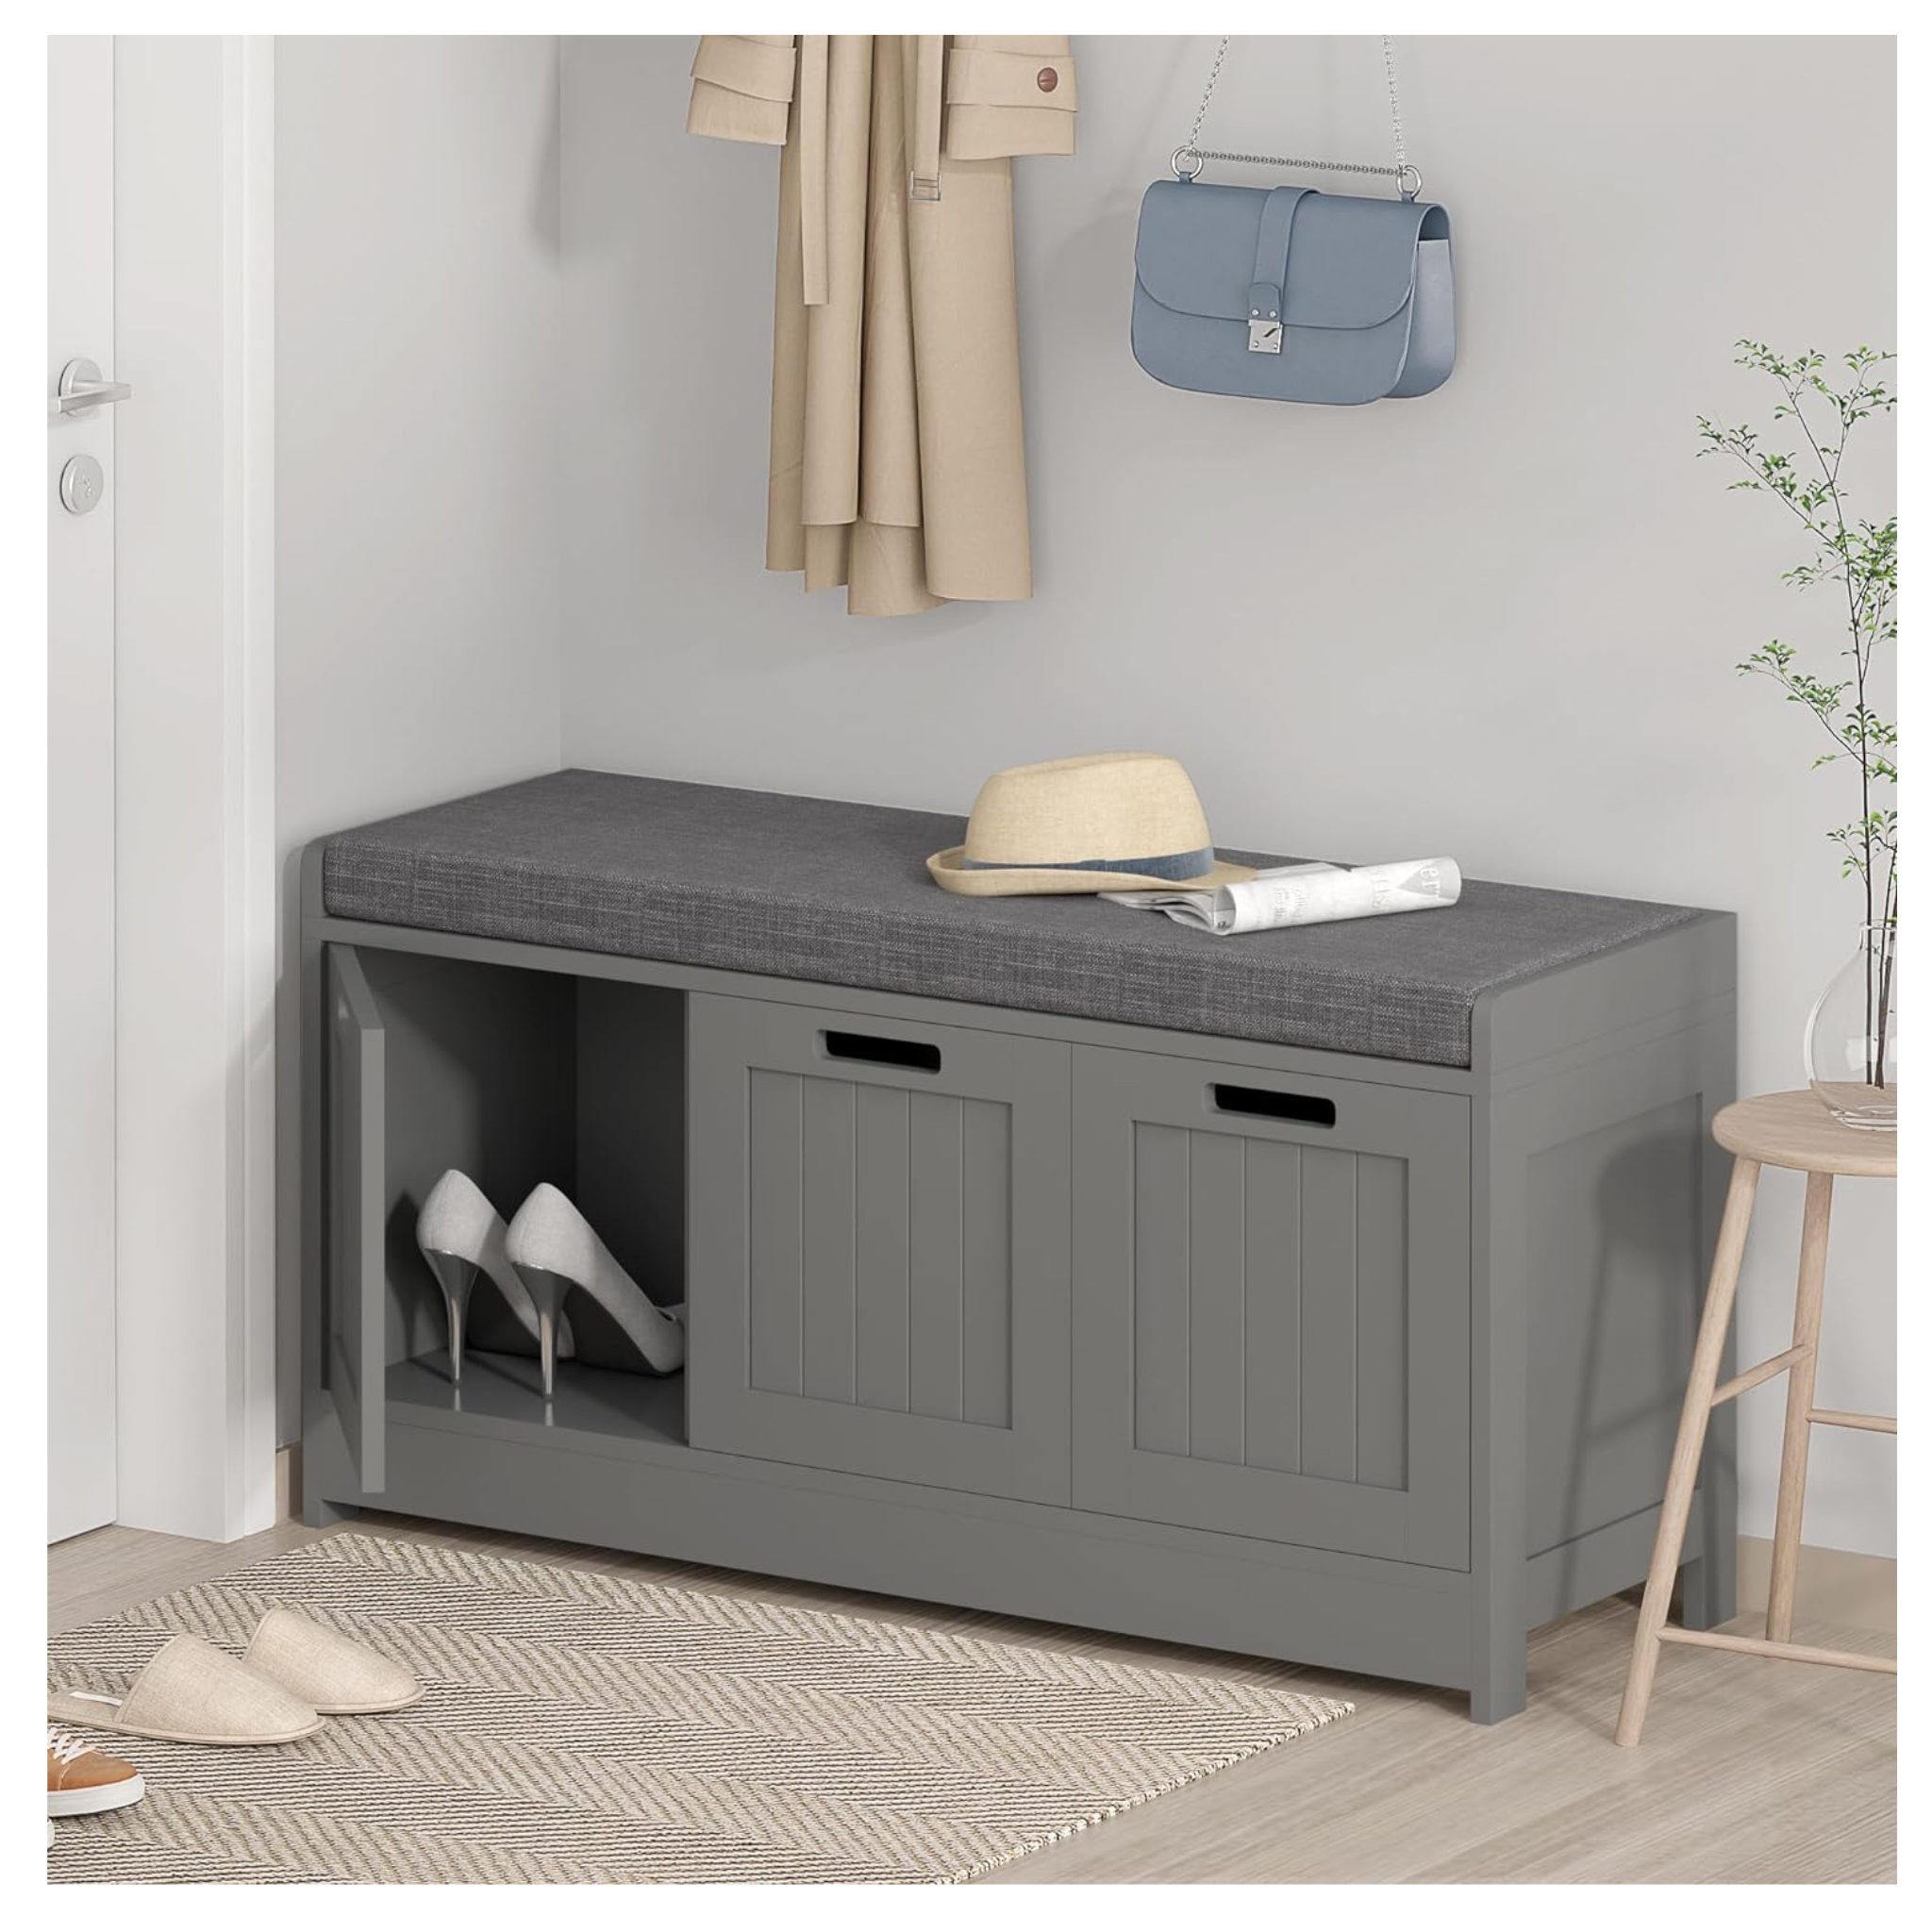 JEROAL Shoe Storage Bench with Removable Cushion & 3-Door Cabinets